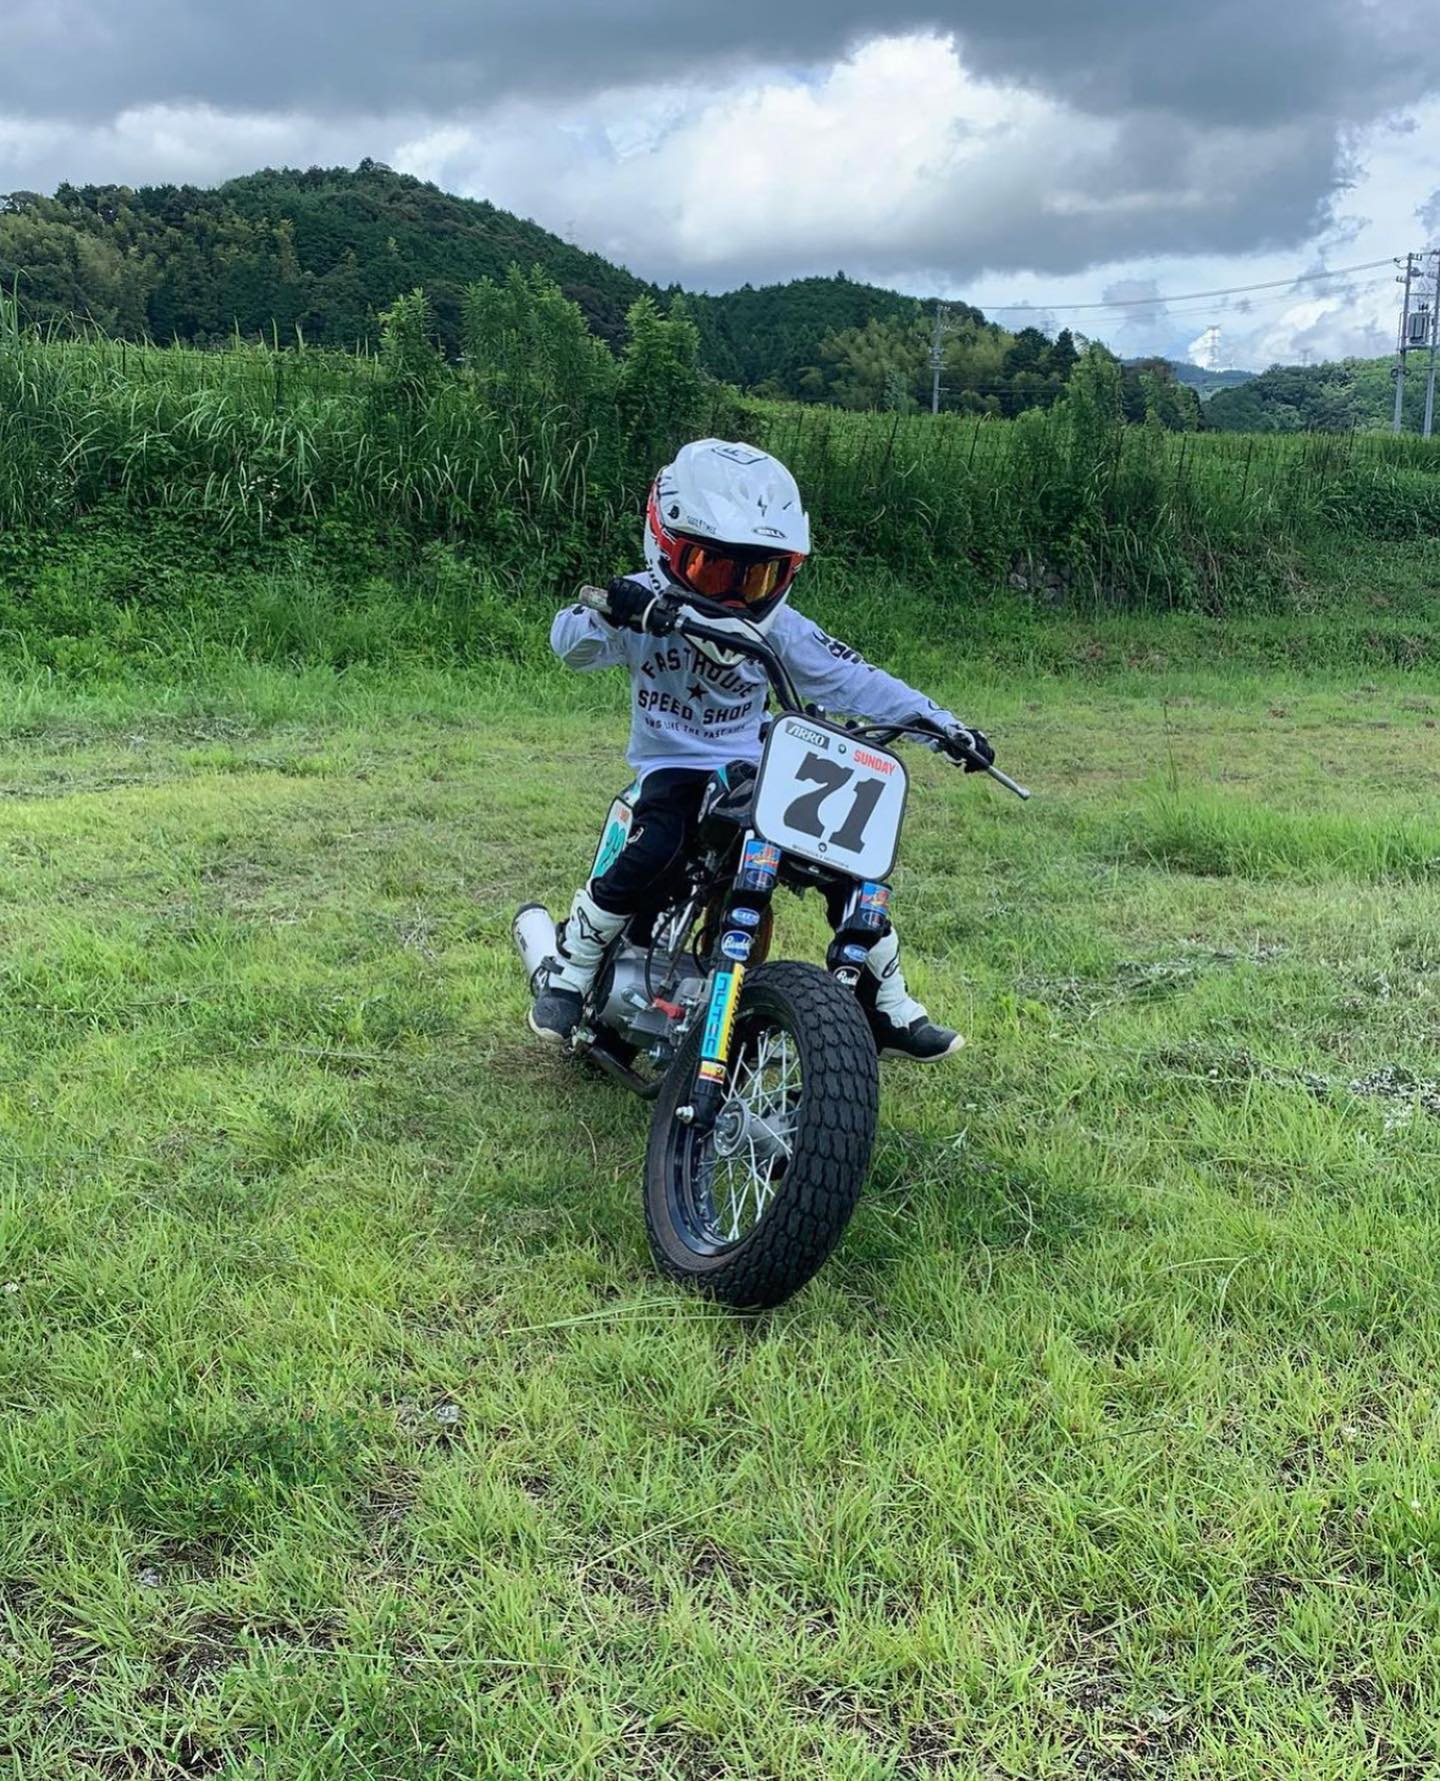 There is no age to have fun on a SUNDAY 🤩
—
#sundaymotors #flattrack #ycf #moto #motorcycle